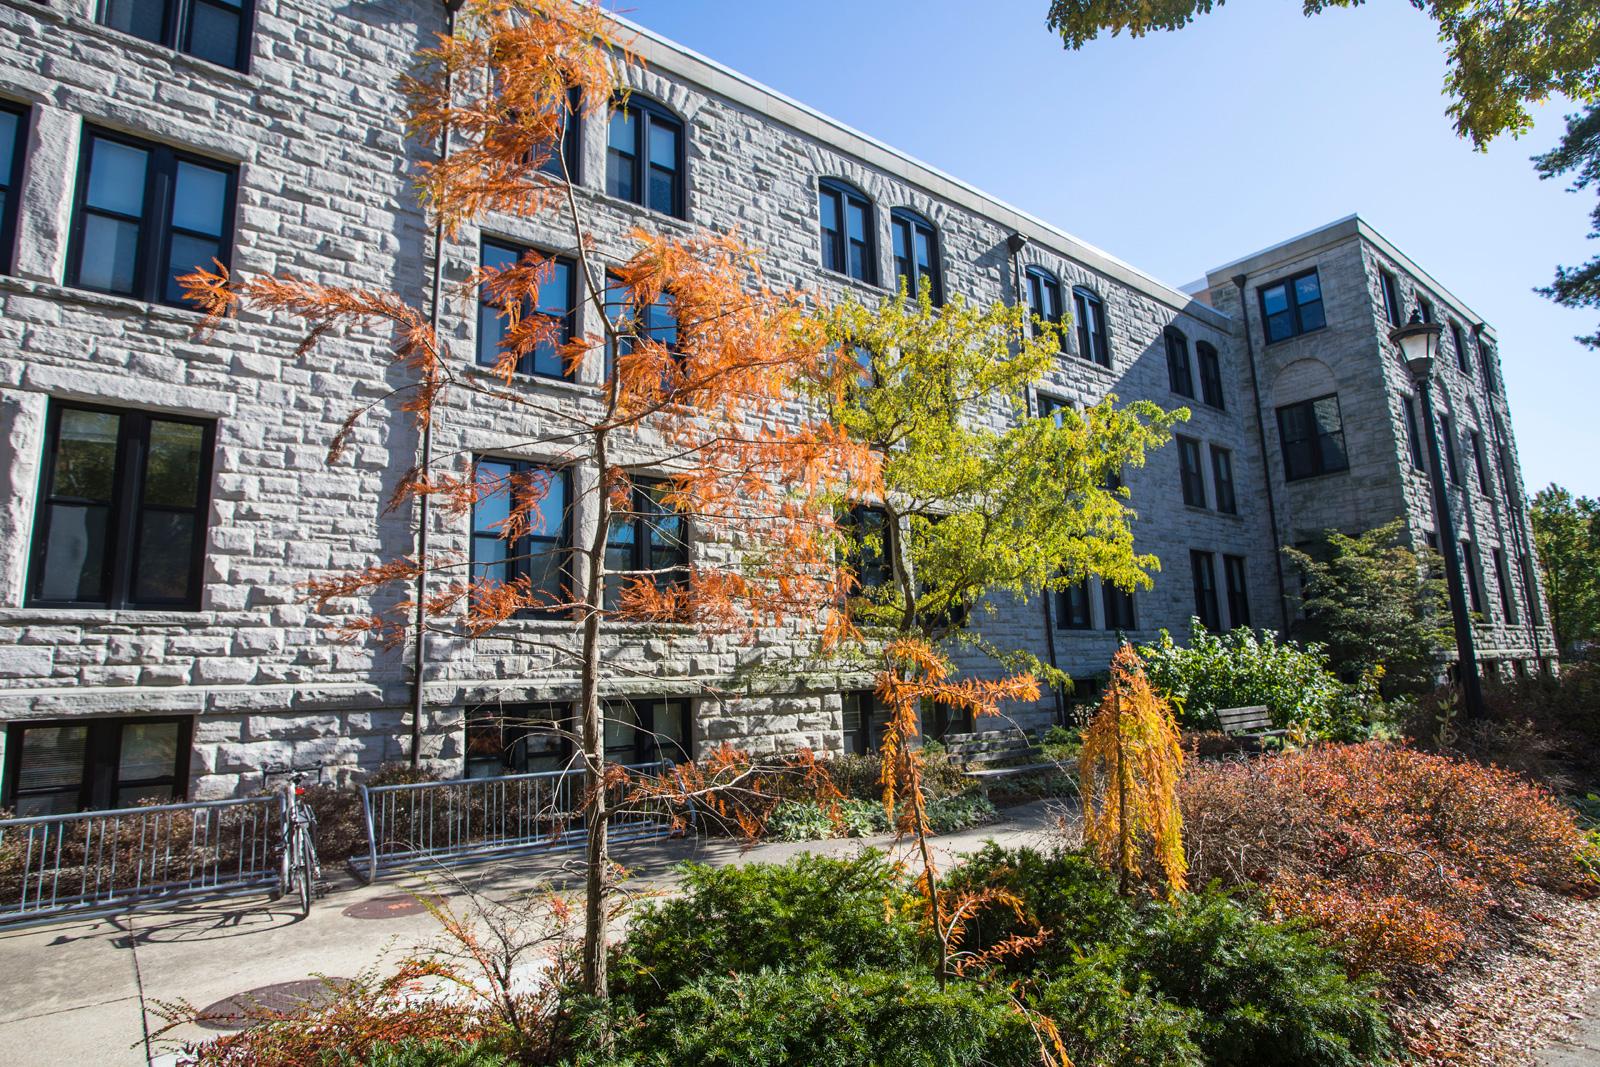 The stone facade of Rice Hall faces young trees and a bike rack.